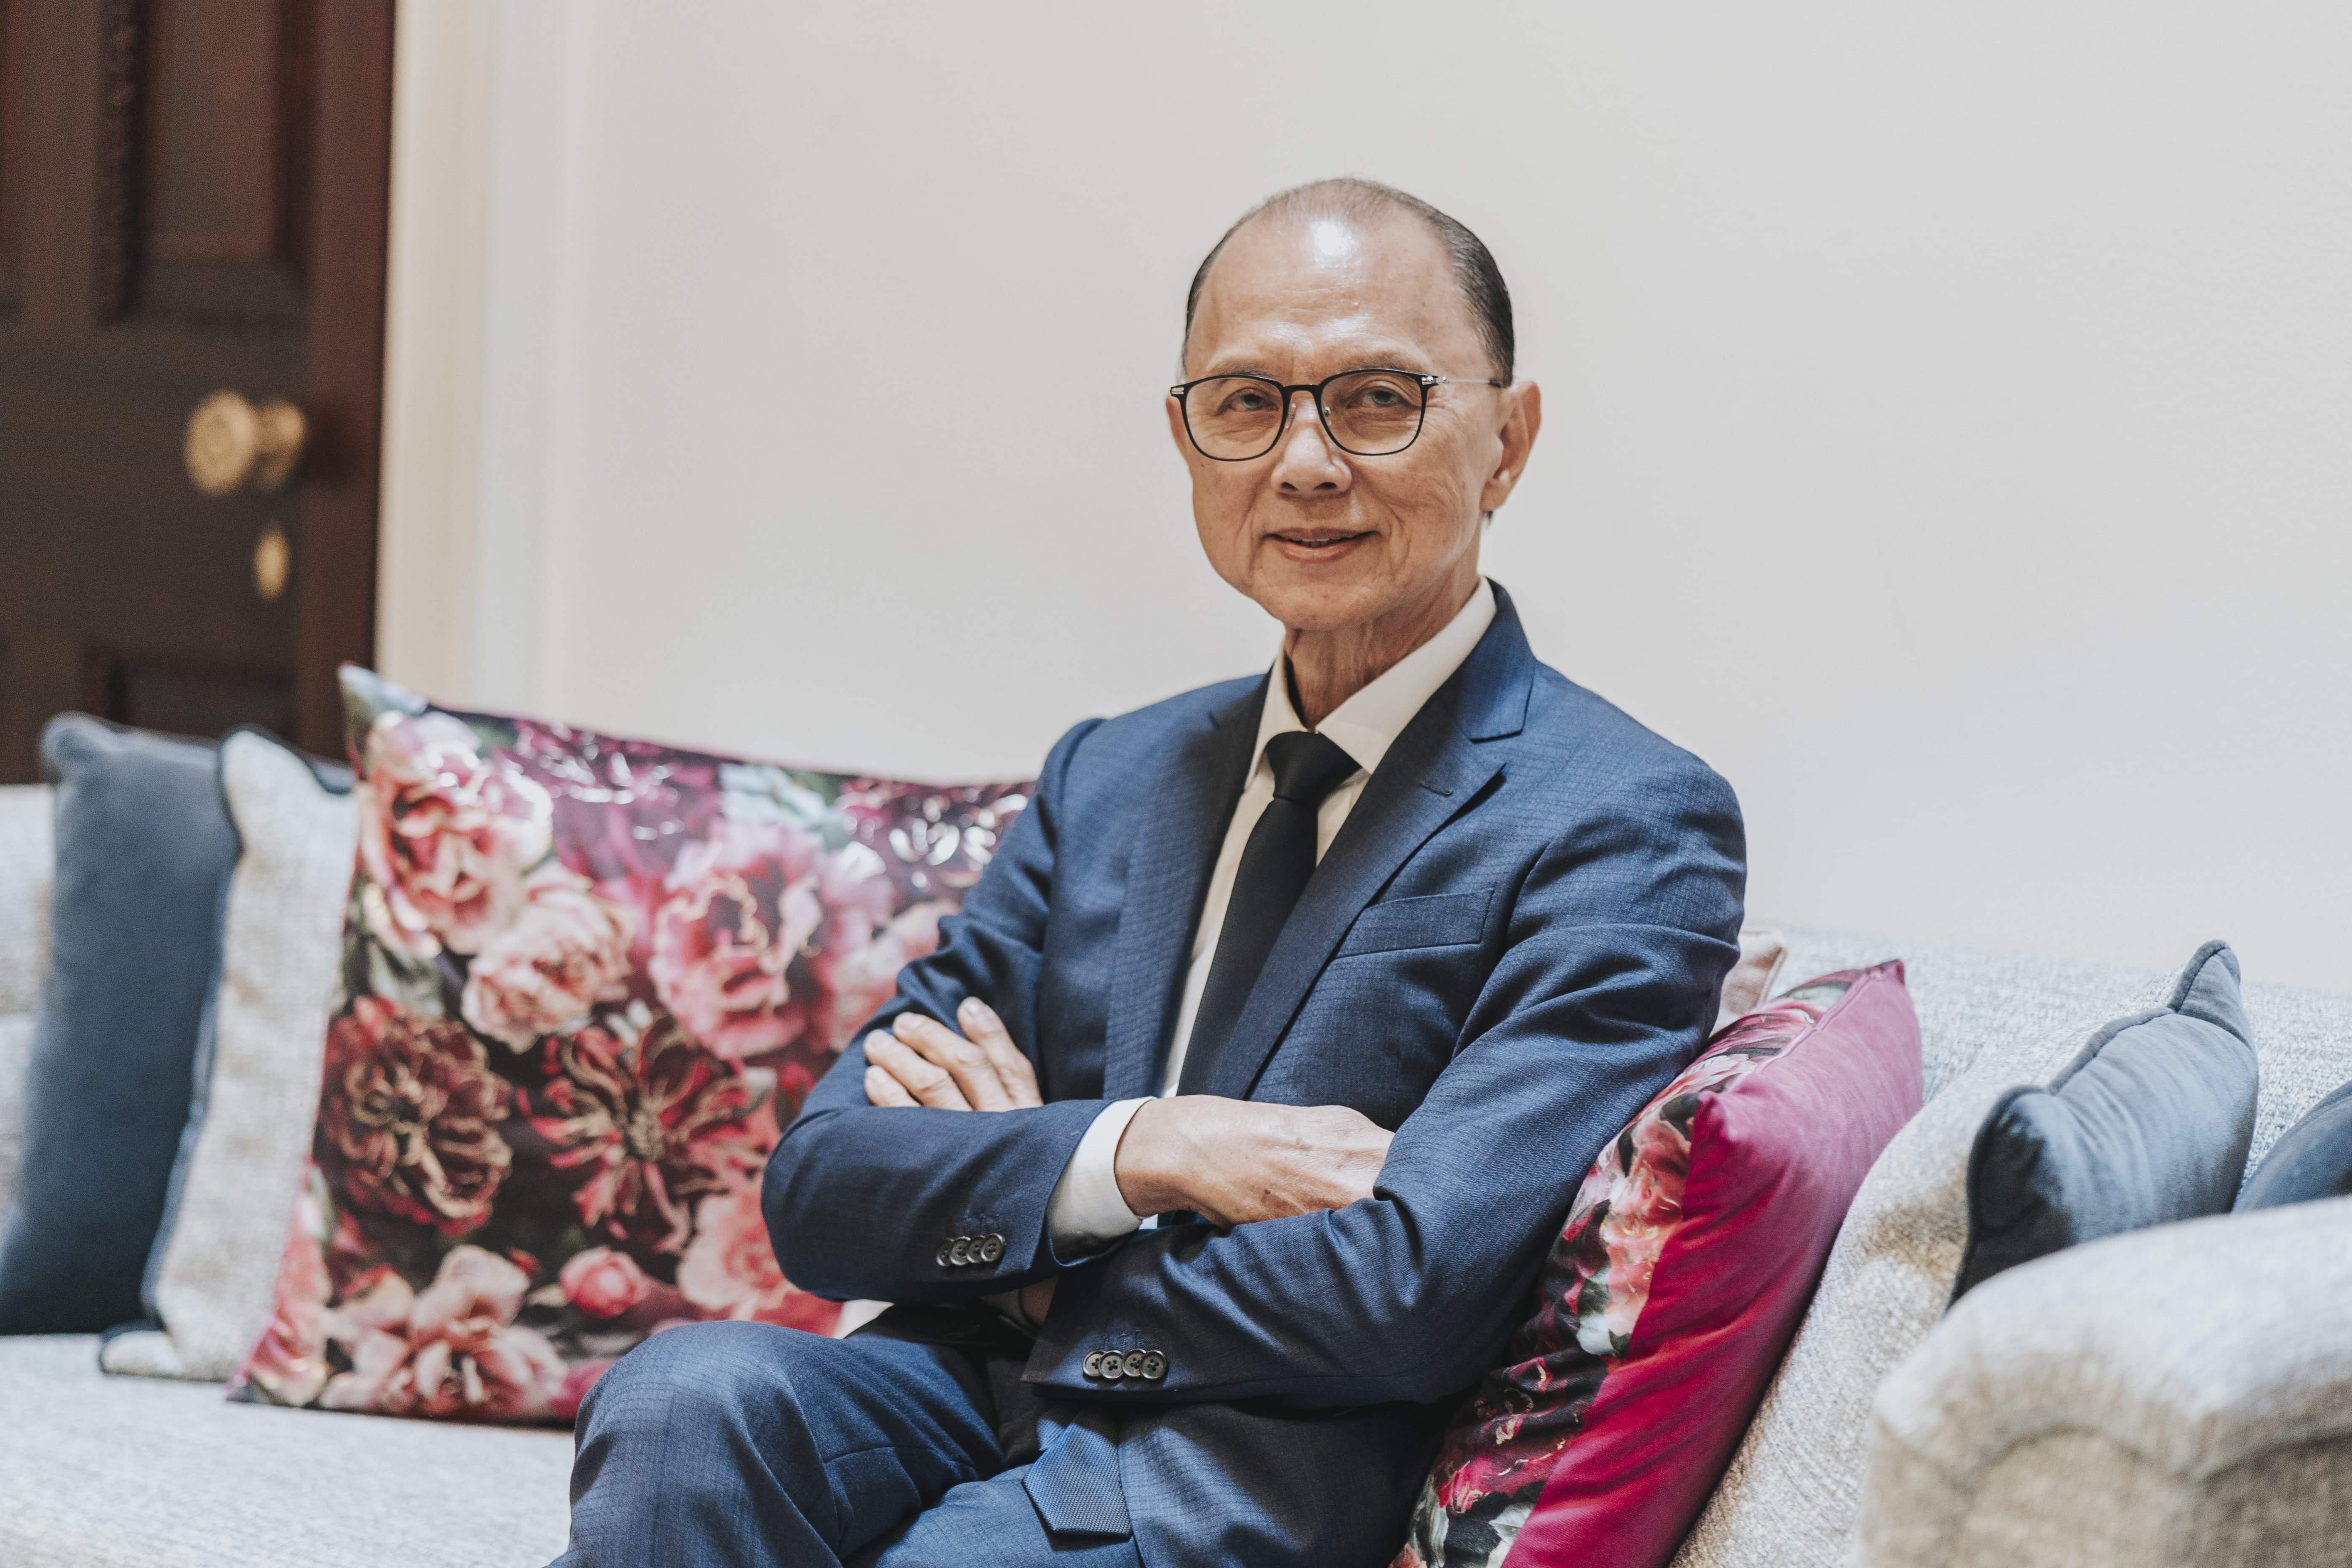 Who will own Jimmy Choo?